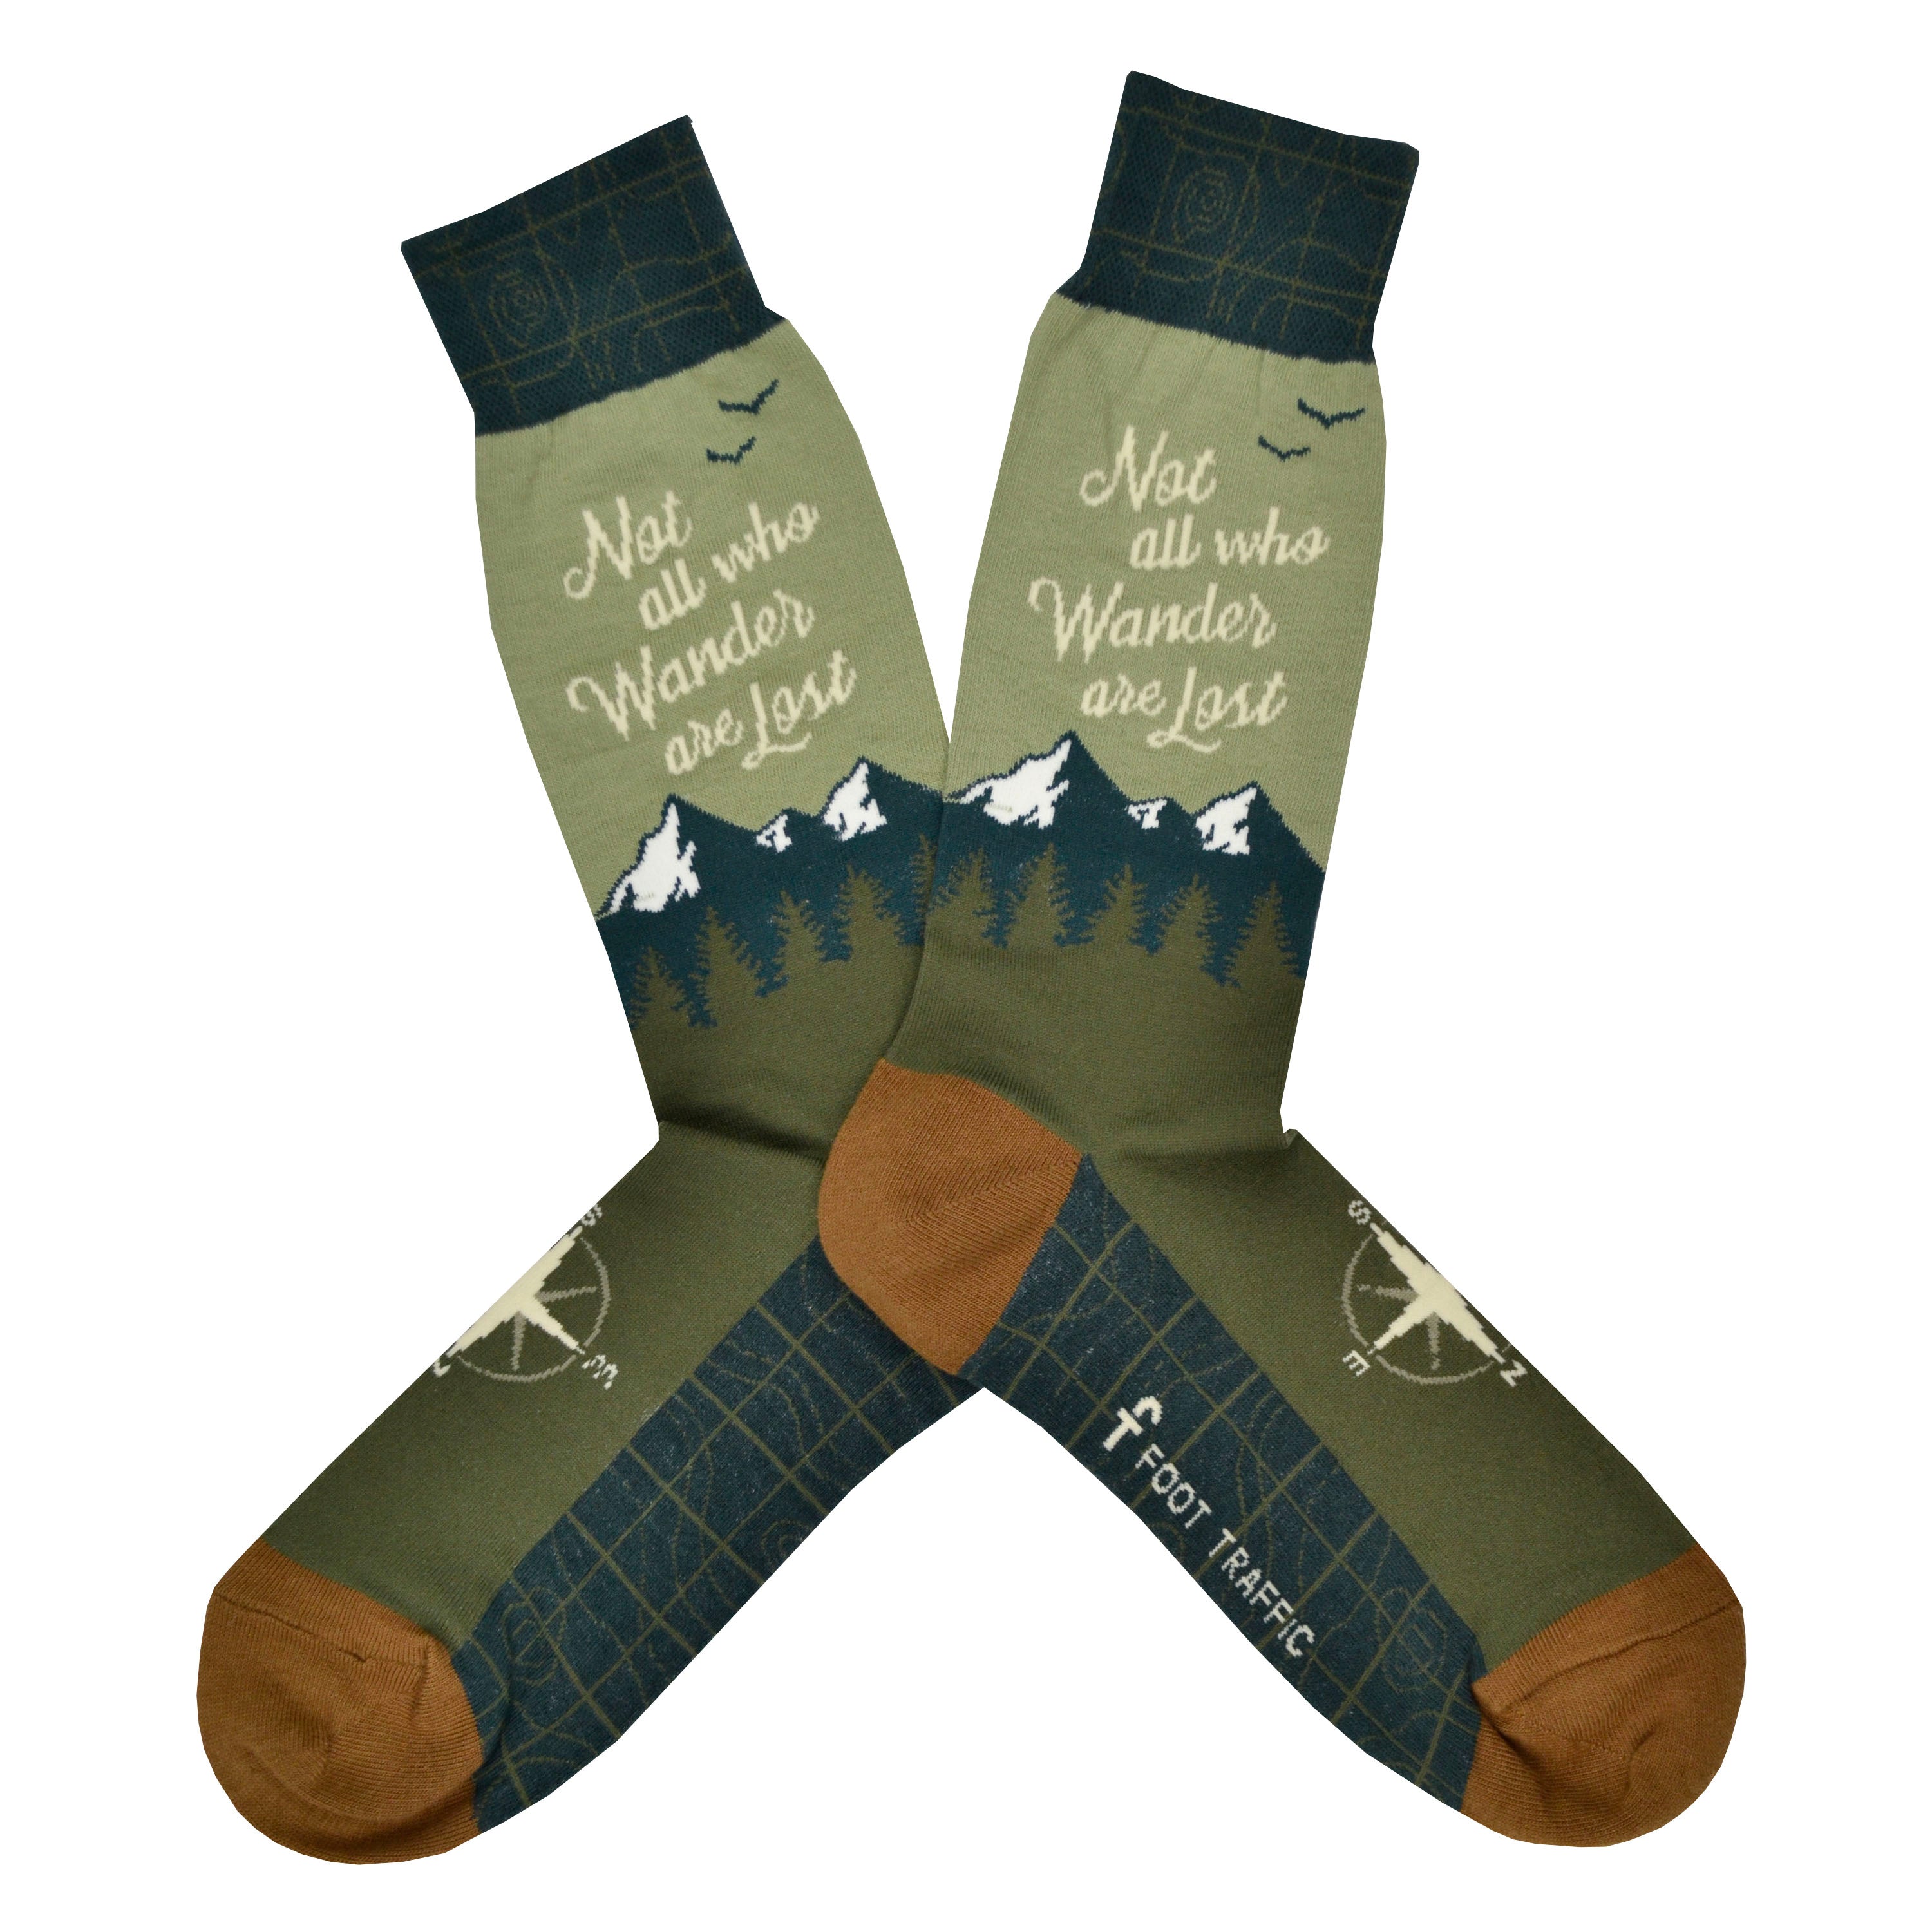 Shown in a flatlay, a pair of men's Foot Traffic brand cotton crew socks with a dark blue cuff, green heel, and mustard toe. The leg of this sock is light green with a blue mountain rage and the words, 